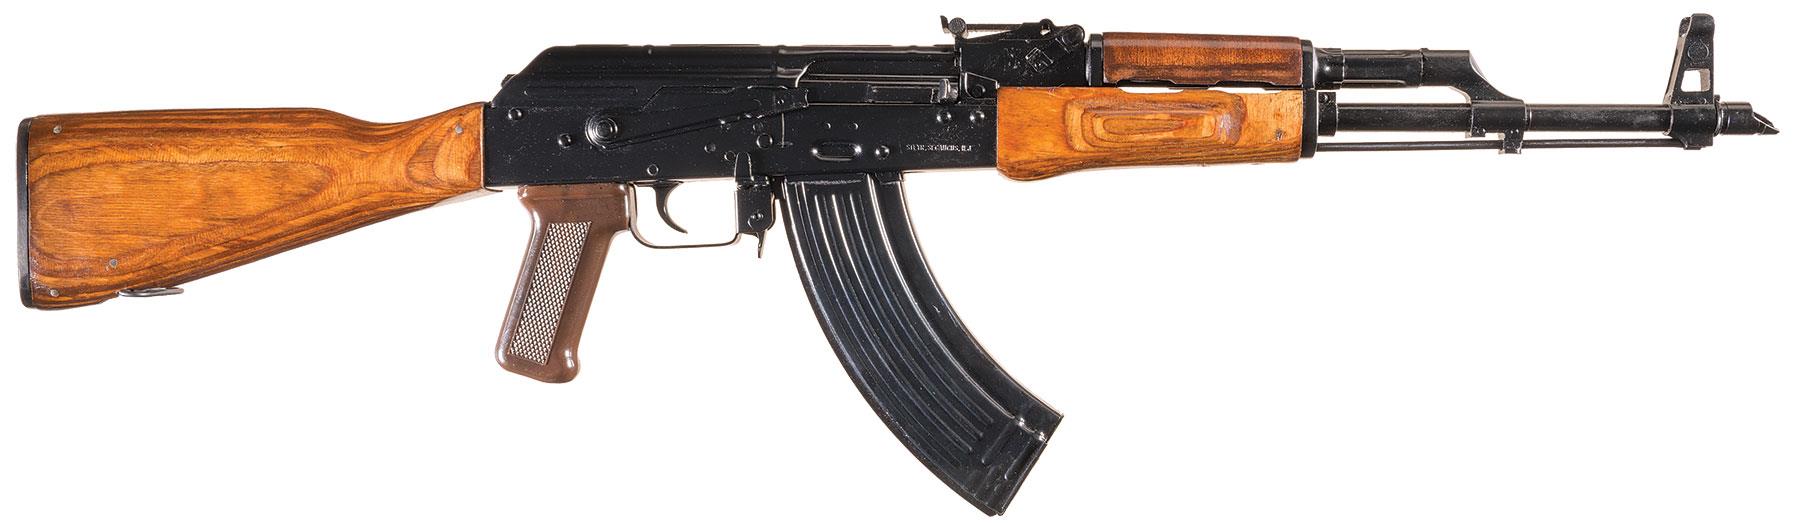 Polytech ak-47 serial numbers